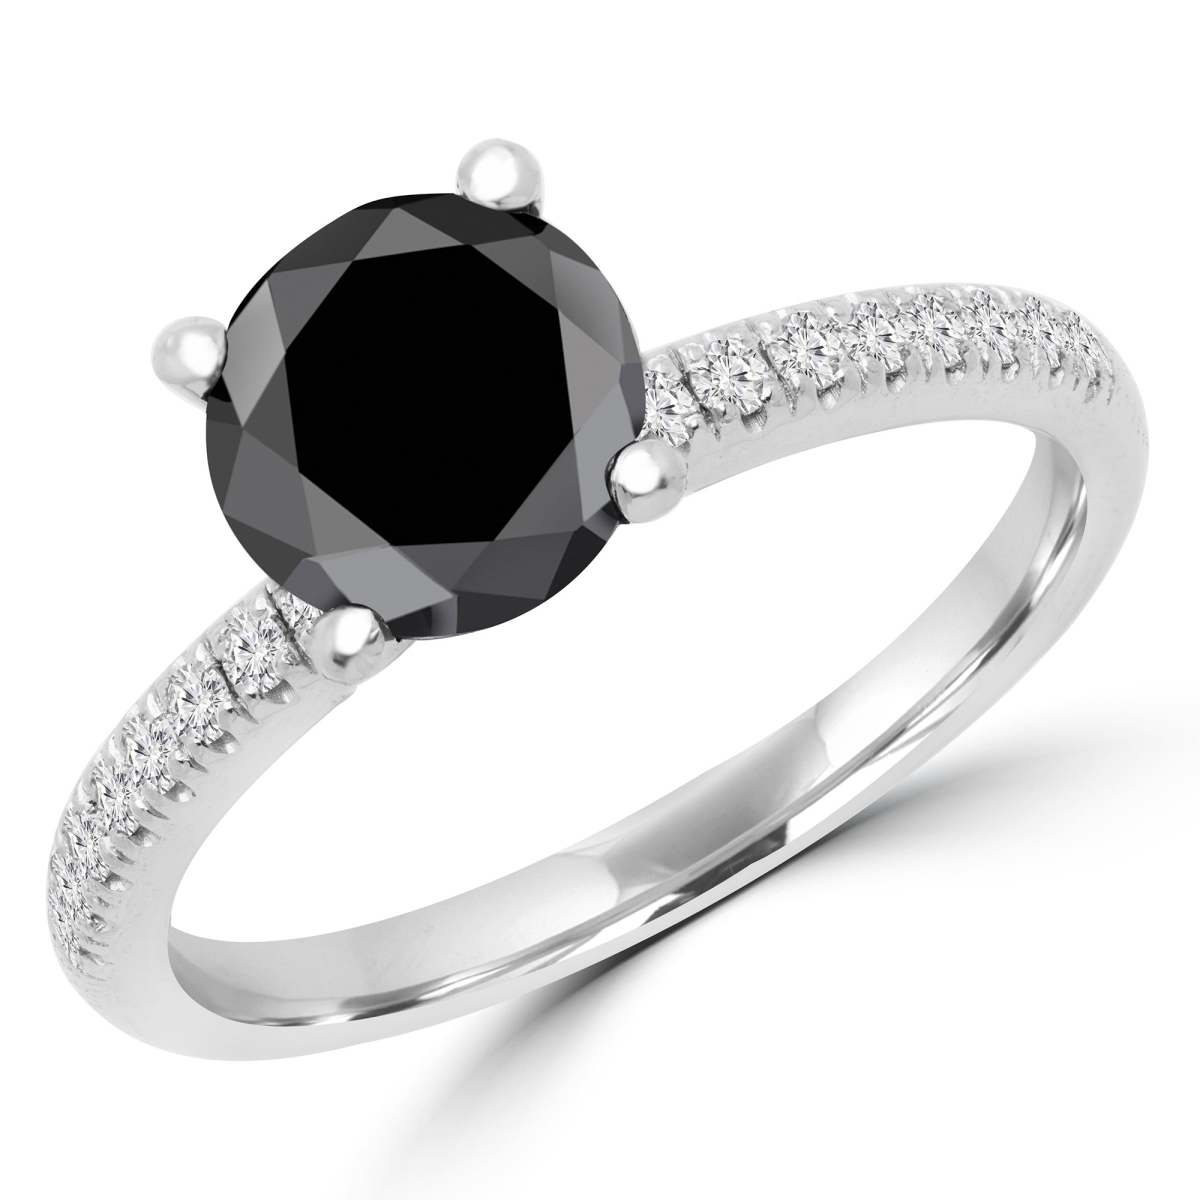 Picture of Majesty Diamonds MD170103 1.87 CTW Round BlacK Diamond Solitaire with Accents Engagement Ring in 14K